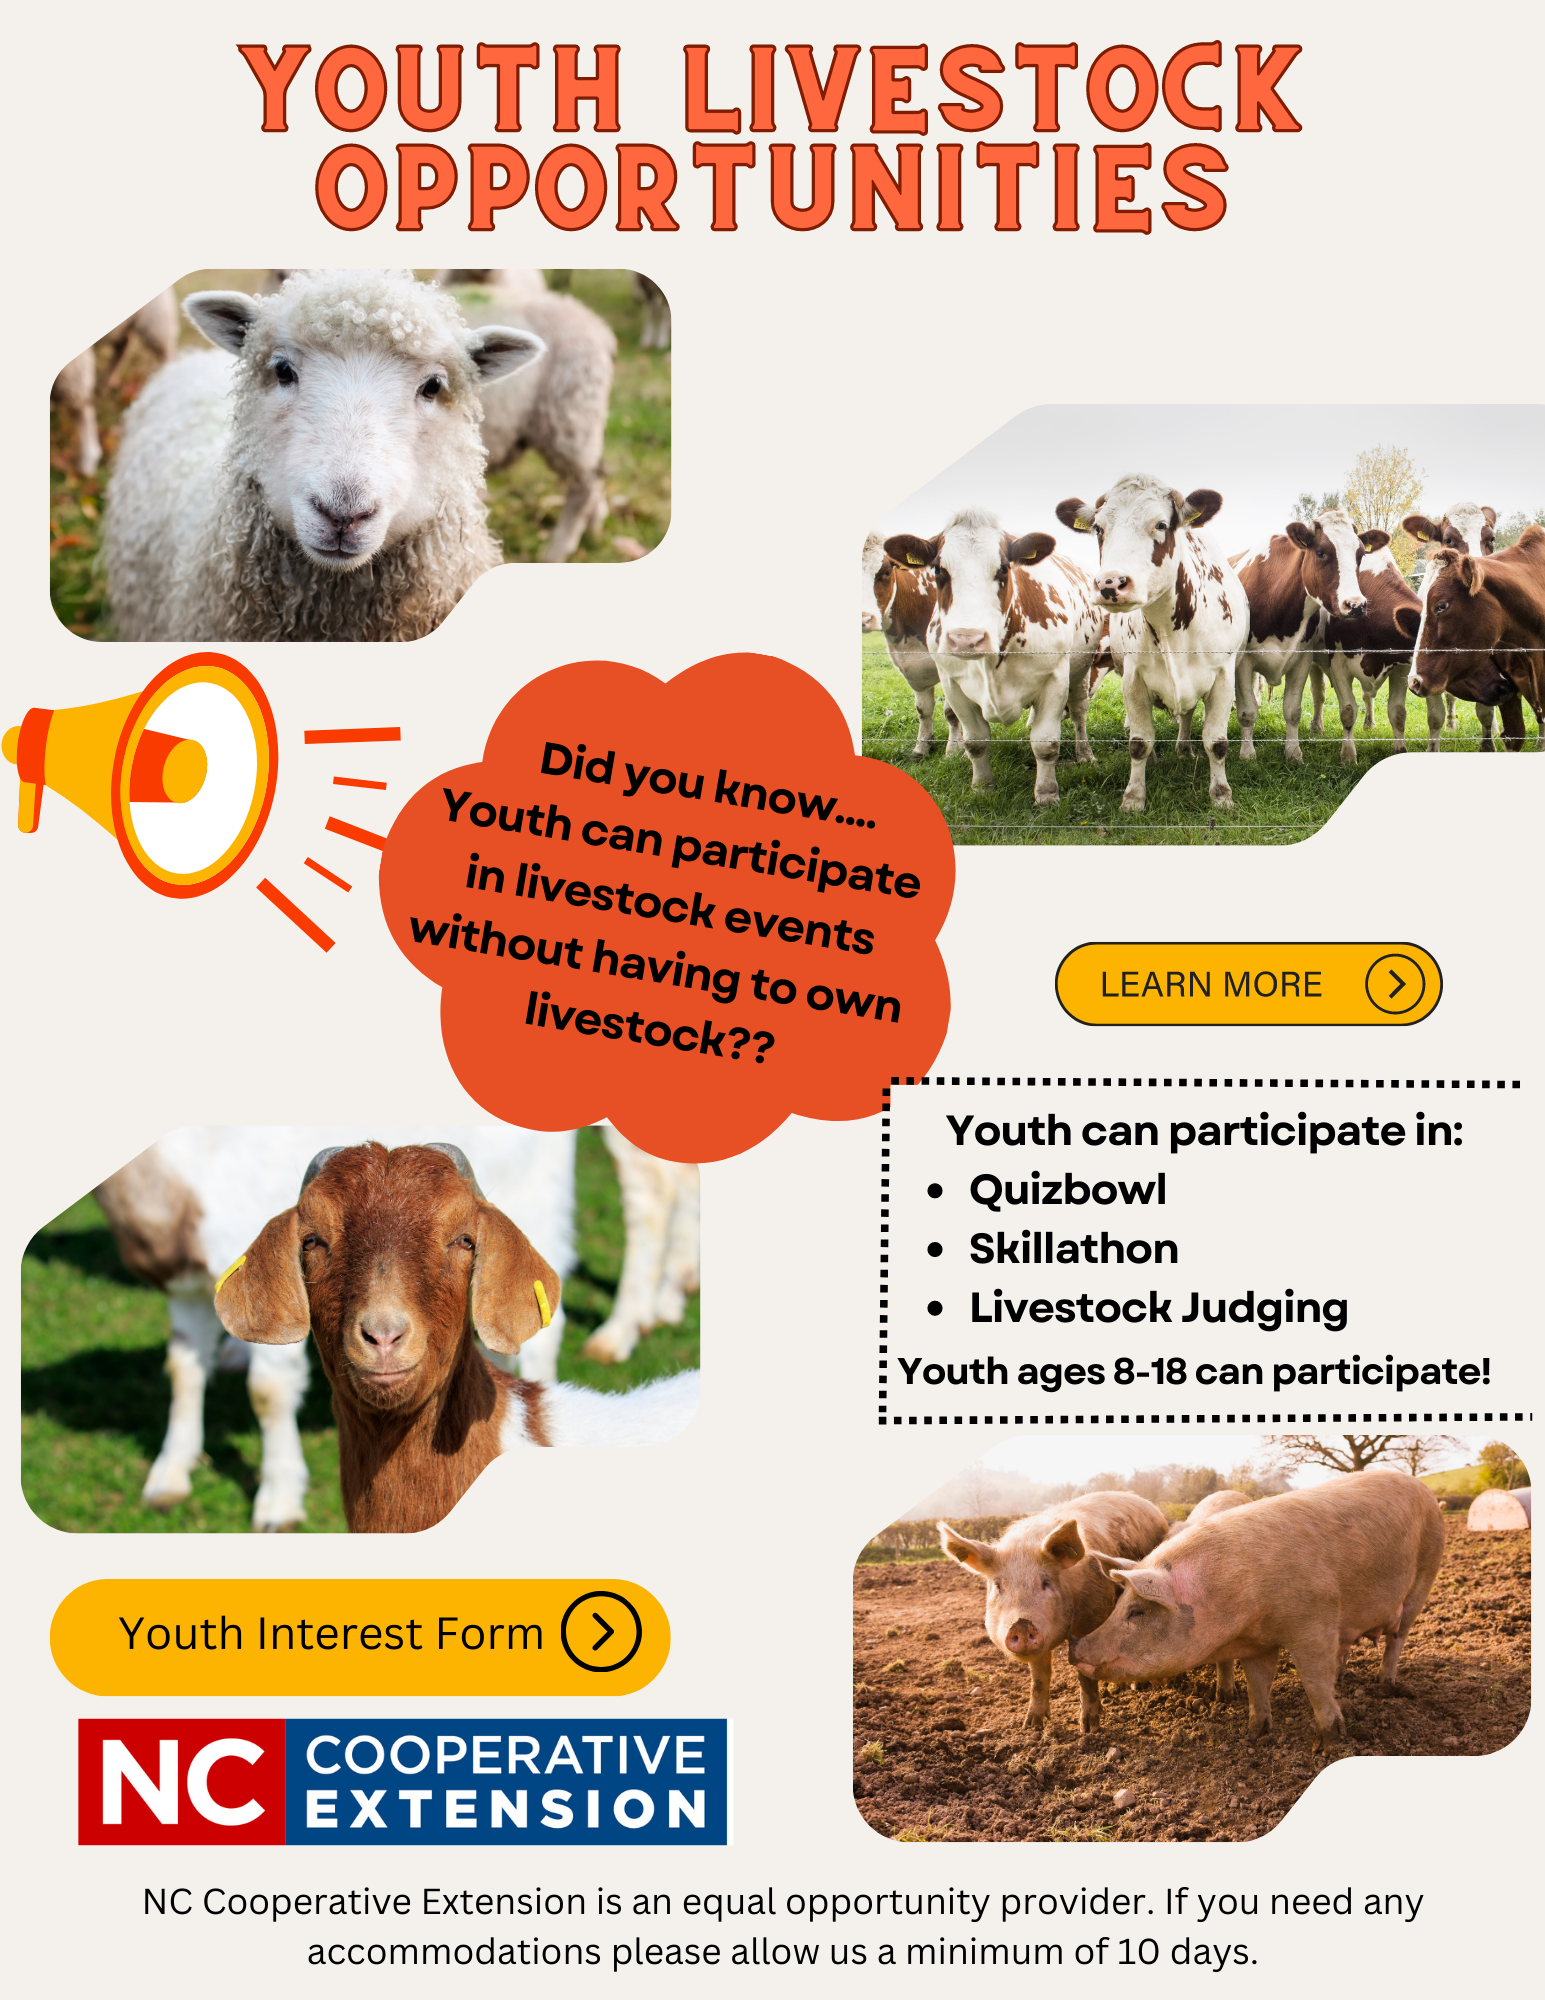  Youth Livestock Opportunities poster